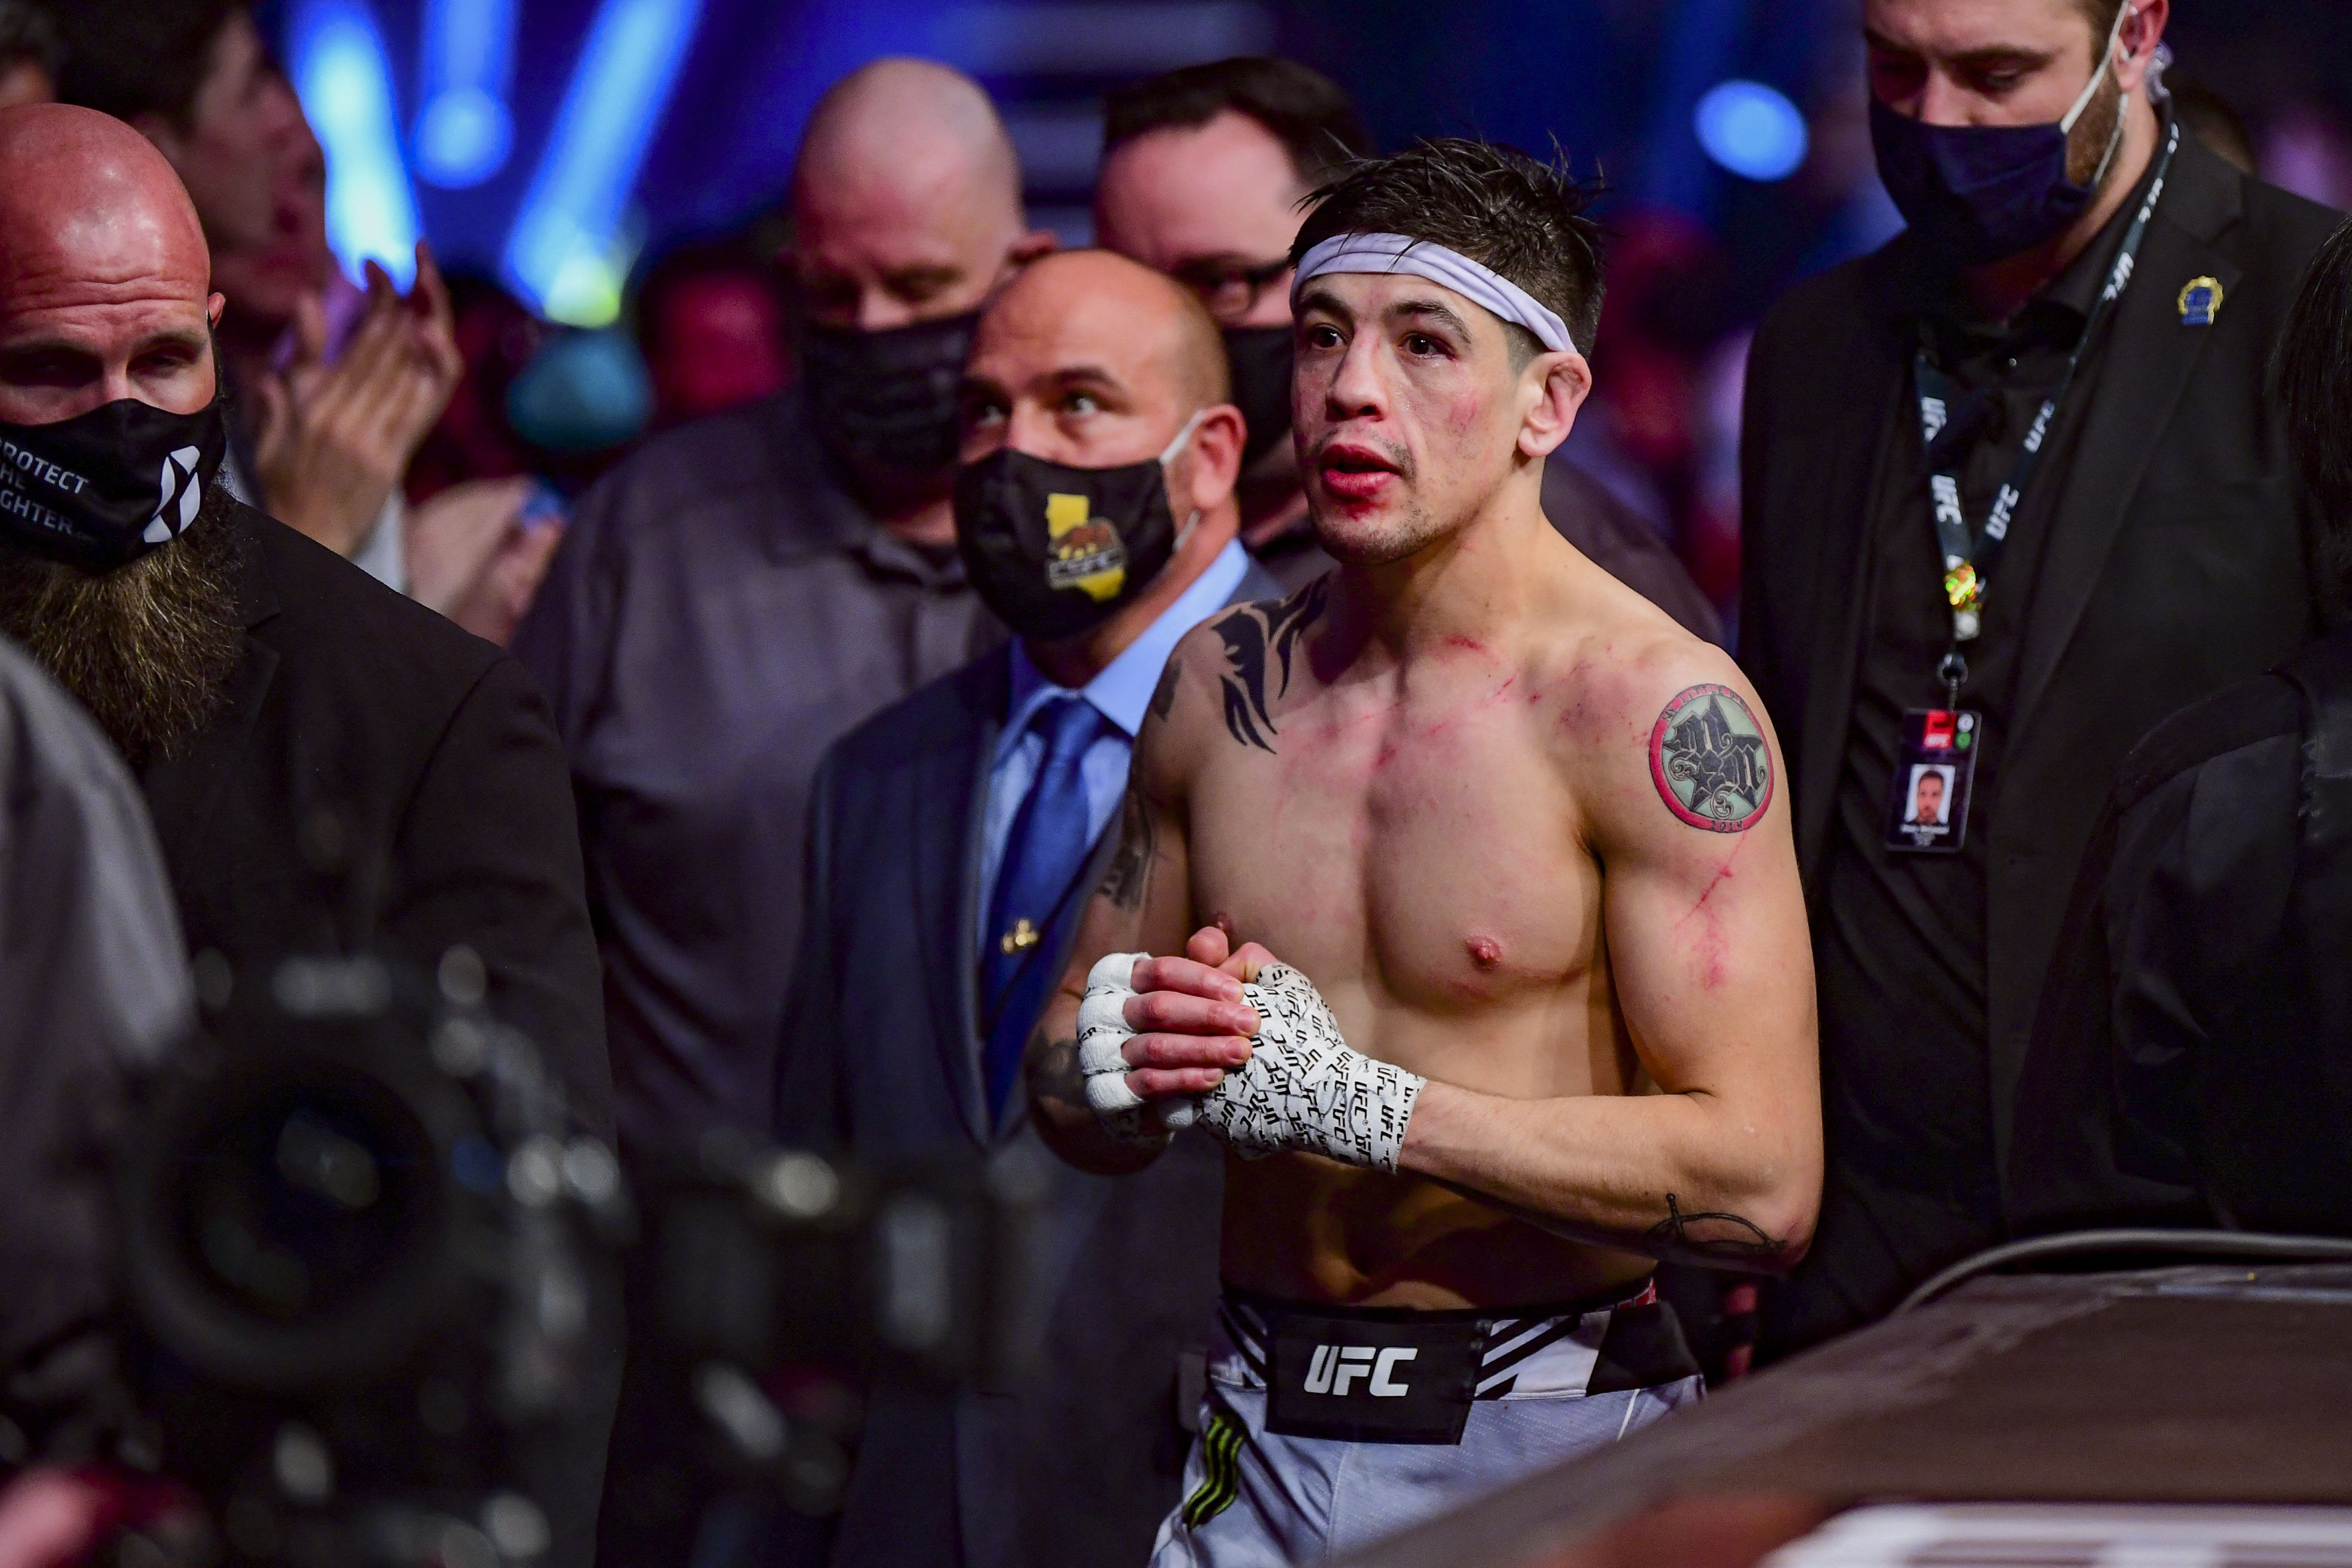 Jan 22, 2022; Anaheim, California, USA; Brandon Moreno leave the octagon after his loss against Deiveson Figueiredo during UFC 270 at Honda Center. Mandatory Credit: Gary A. Vasquez-USA TODAY Sports